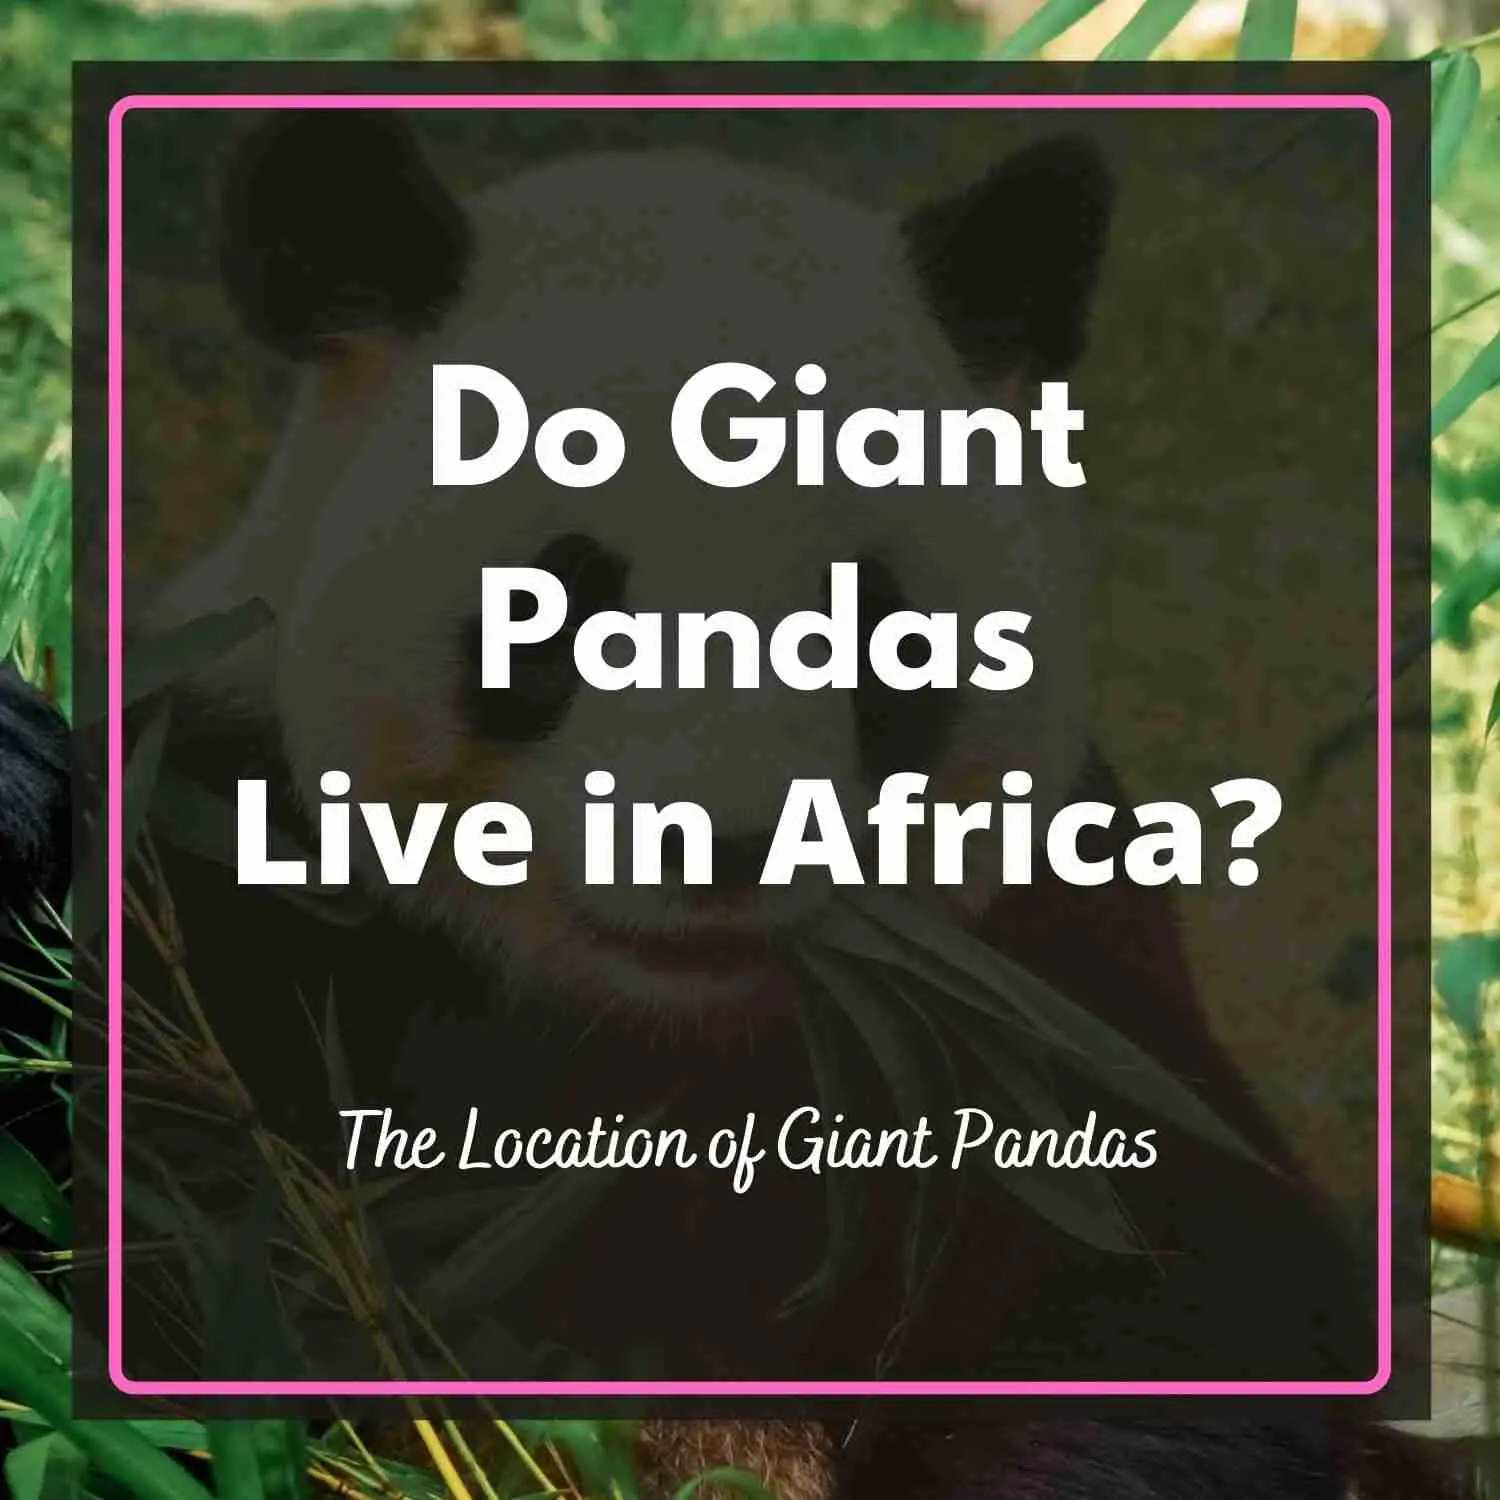 Do Giant Pandas Live in Africa